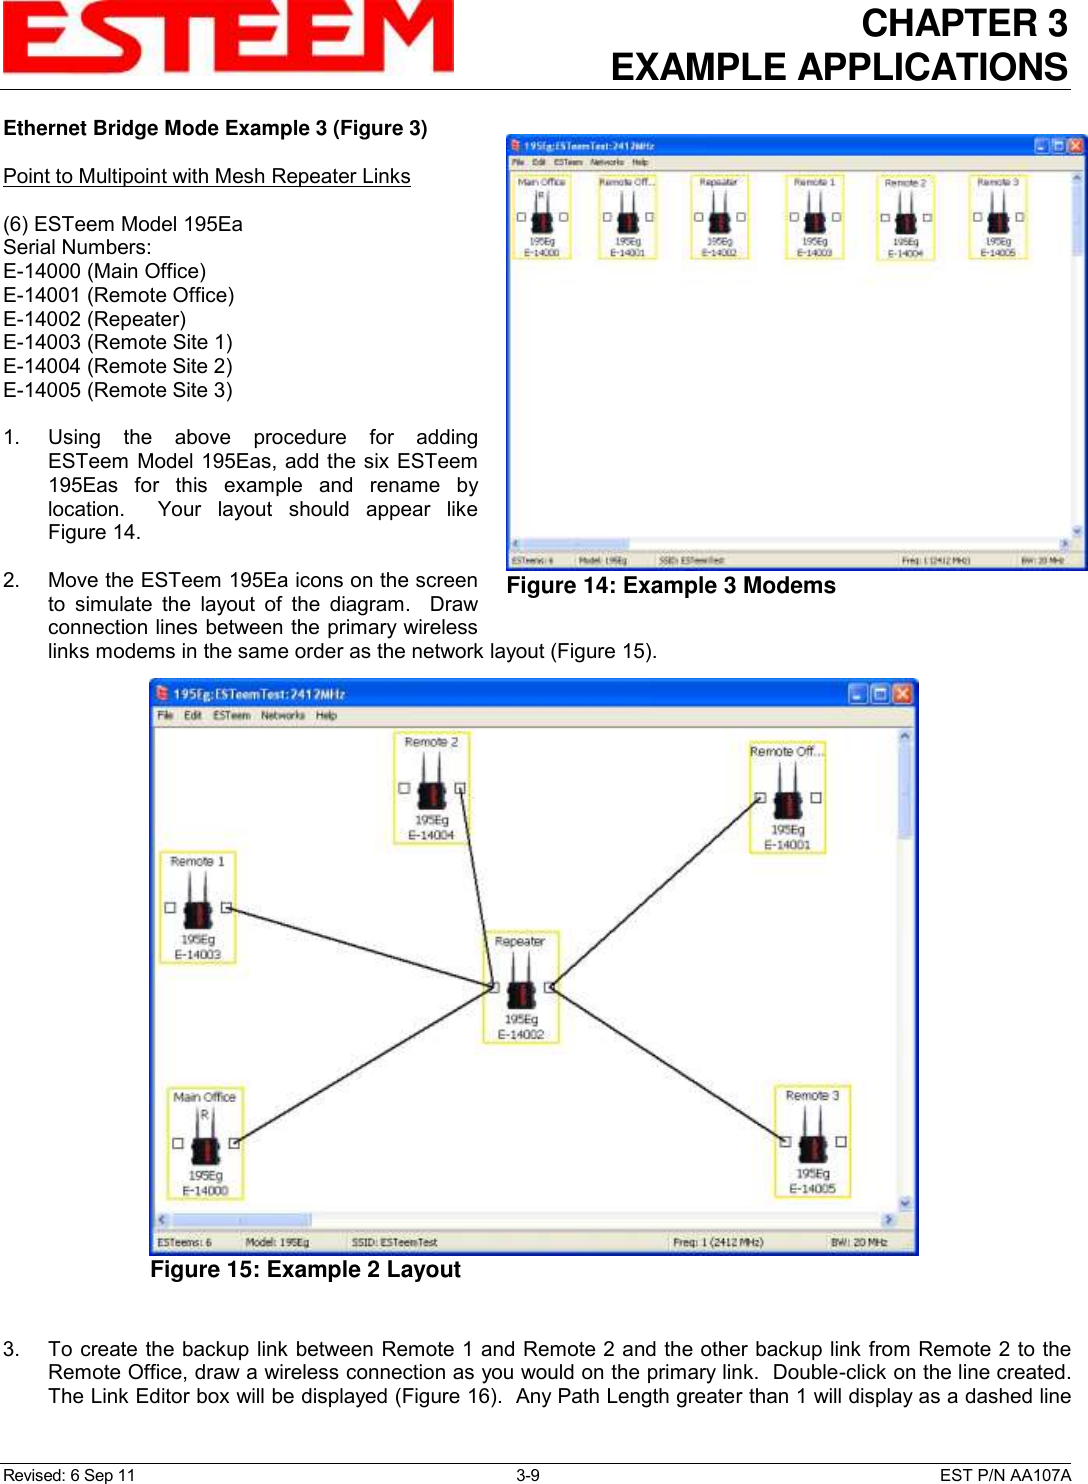 CHAPTER 3 EXAMPLE APPLICATIONS  Revised: 6 Sep 11  3-9  EST P/N AA107A Ethernet Bridge Mode Example 3 (Figure 3)  Point to Multipoint with Mesh Repeater Links  (6) ESTeem Model 195Ea Serial Numbers: E-14000 (Main Office) E-14001 (Remote Office) E-14002 (Repeater) E-14003 (Remote Site 1) E-14004 (Remote Site 2) E-14005 (Remote Site 3)  1.    Using  the  above  procedure  for  adding ESTeem  Model 195Eas, add the six ESTeem 195Eas  for  this  example  and  rename  by location.    Your  layout  should  appear  like Figure 14.   2.    Move the ESTeem 195Ea icons on the screen to  simulate  the  layout  of  the  diagram.    Draw connection lines between the primary wireless links modems in the same order as the network layout (Figure 15).  3.    To create the backup link between Remote 1 and Remote 2 and the other backup link from Remote 2 to the Remote Office, draw a wireless connection as you would on the primary link.  Double-click on the line created.  The Link Editor box will be displayed (Figure 16).  Any Path Length greater than 1 will display as a dashed line  Figure 14: Example 3 Modems   Figure 15: Example 2 Layout  